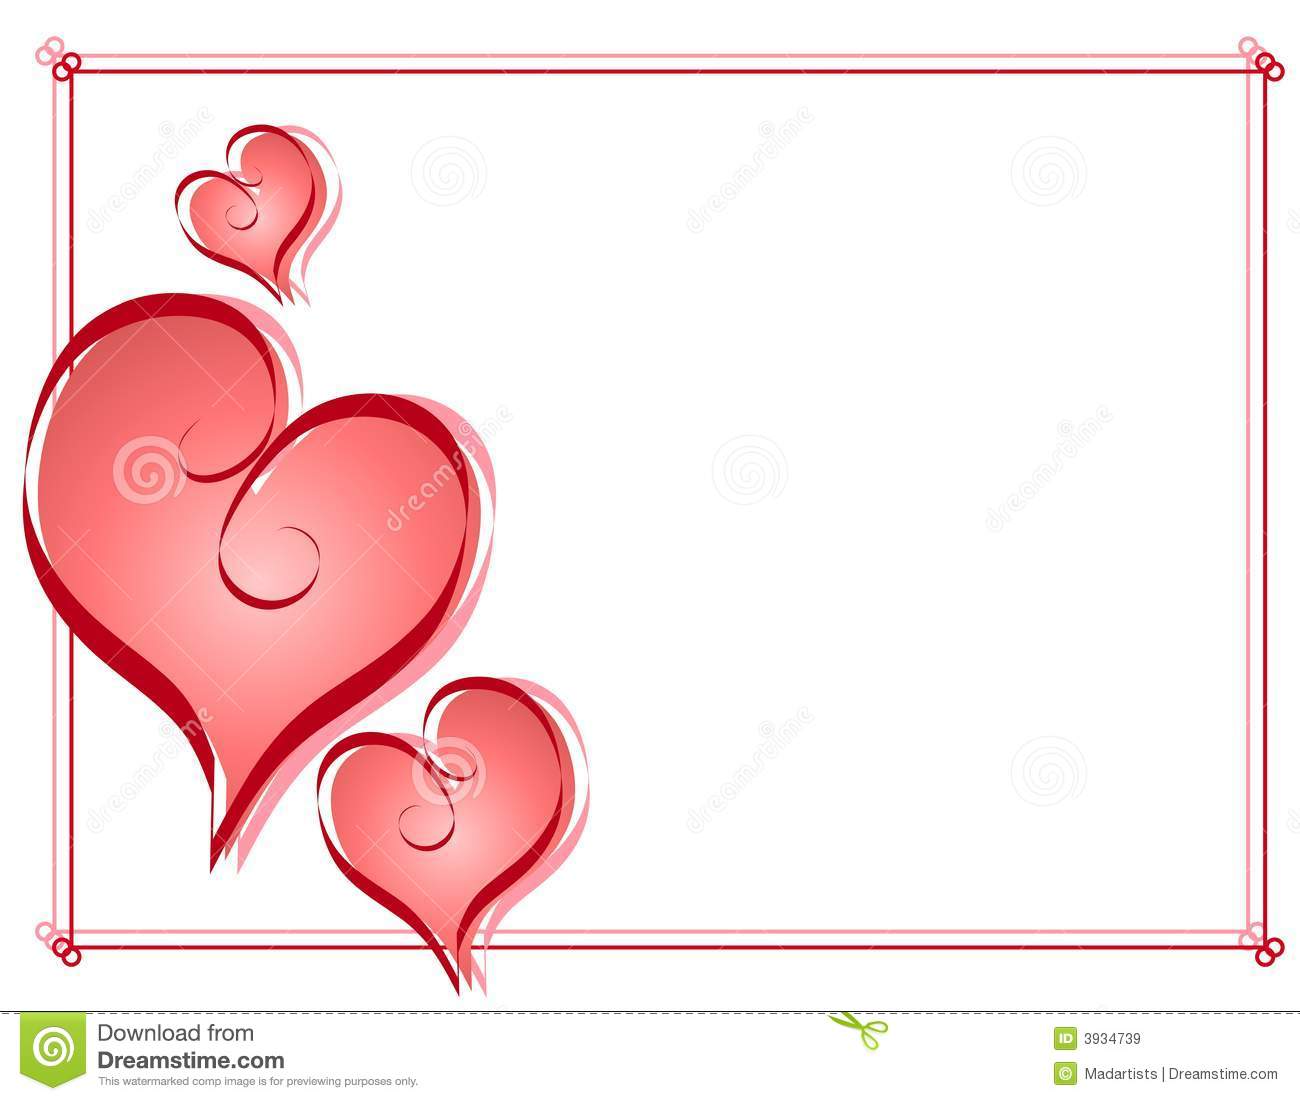 Calligraphy Valentine Hearts Frame Border Royalty Free Stock Images